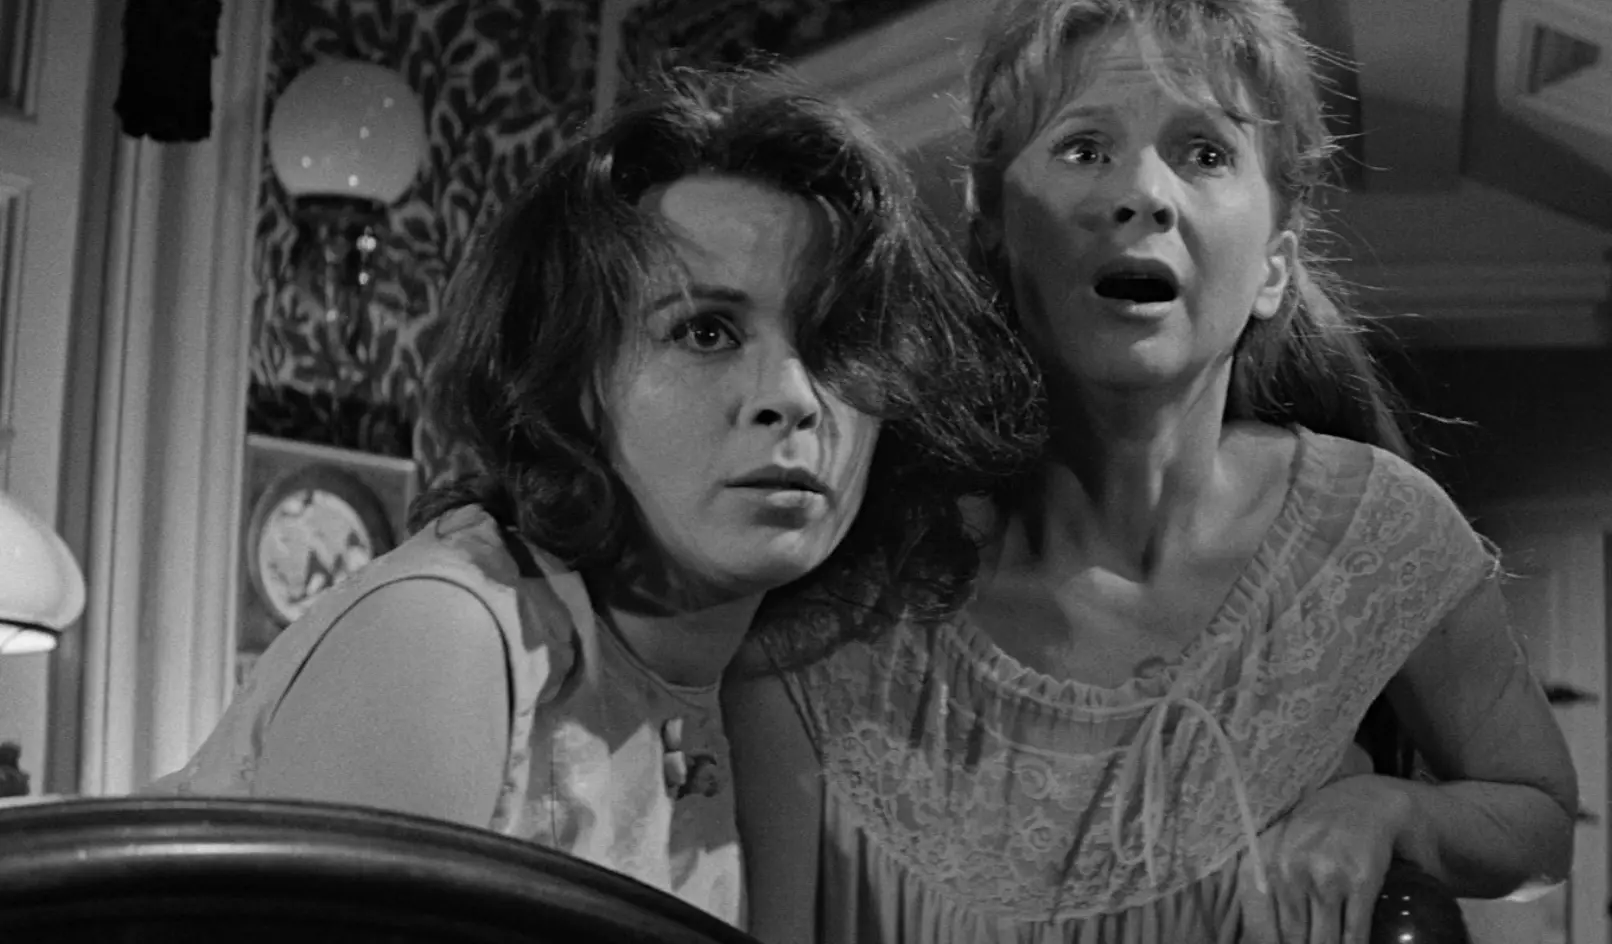 The Haunting still stands up as one of the scariest old horror movies.